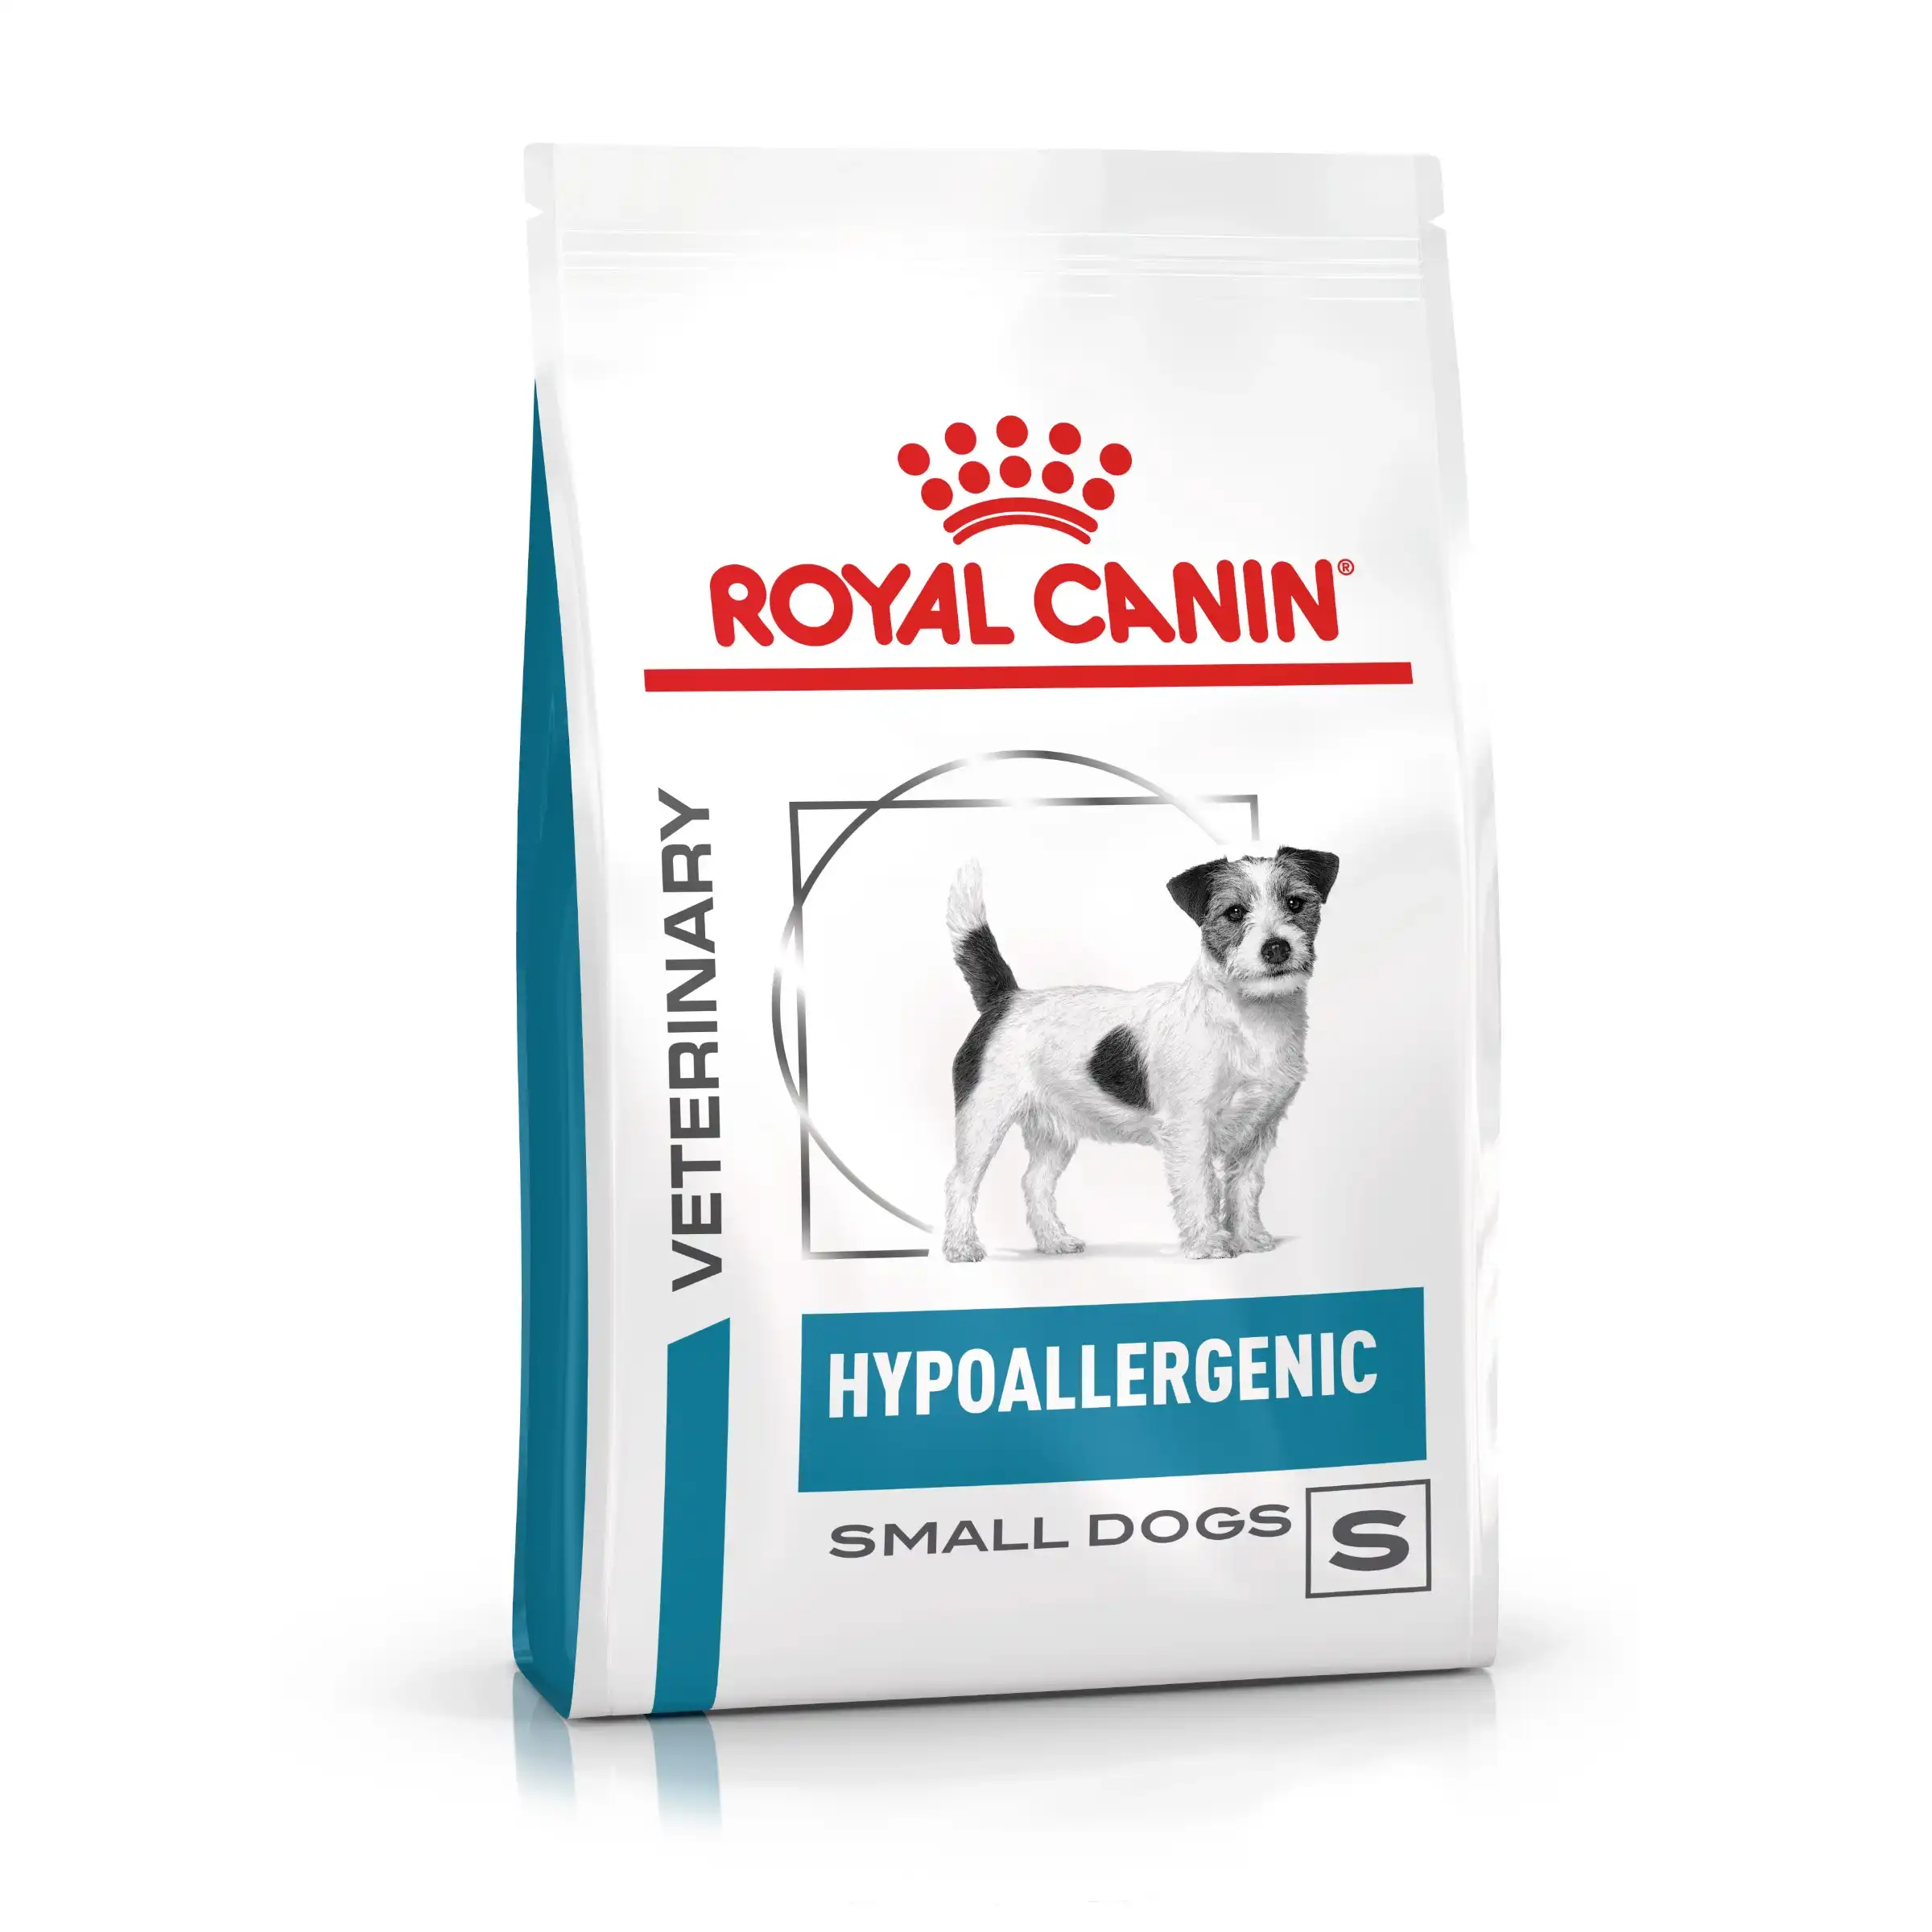 Royal Canin Veterinary Canine Hypoallergenic Small Dog pienso para perros - 3,5 kg